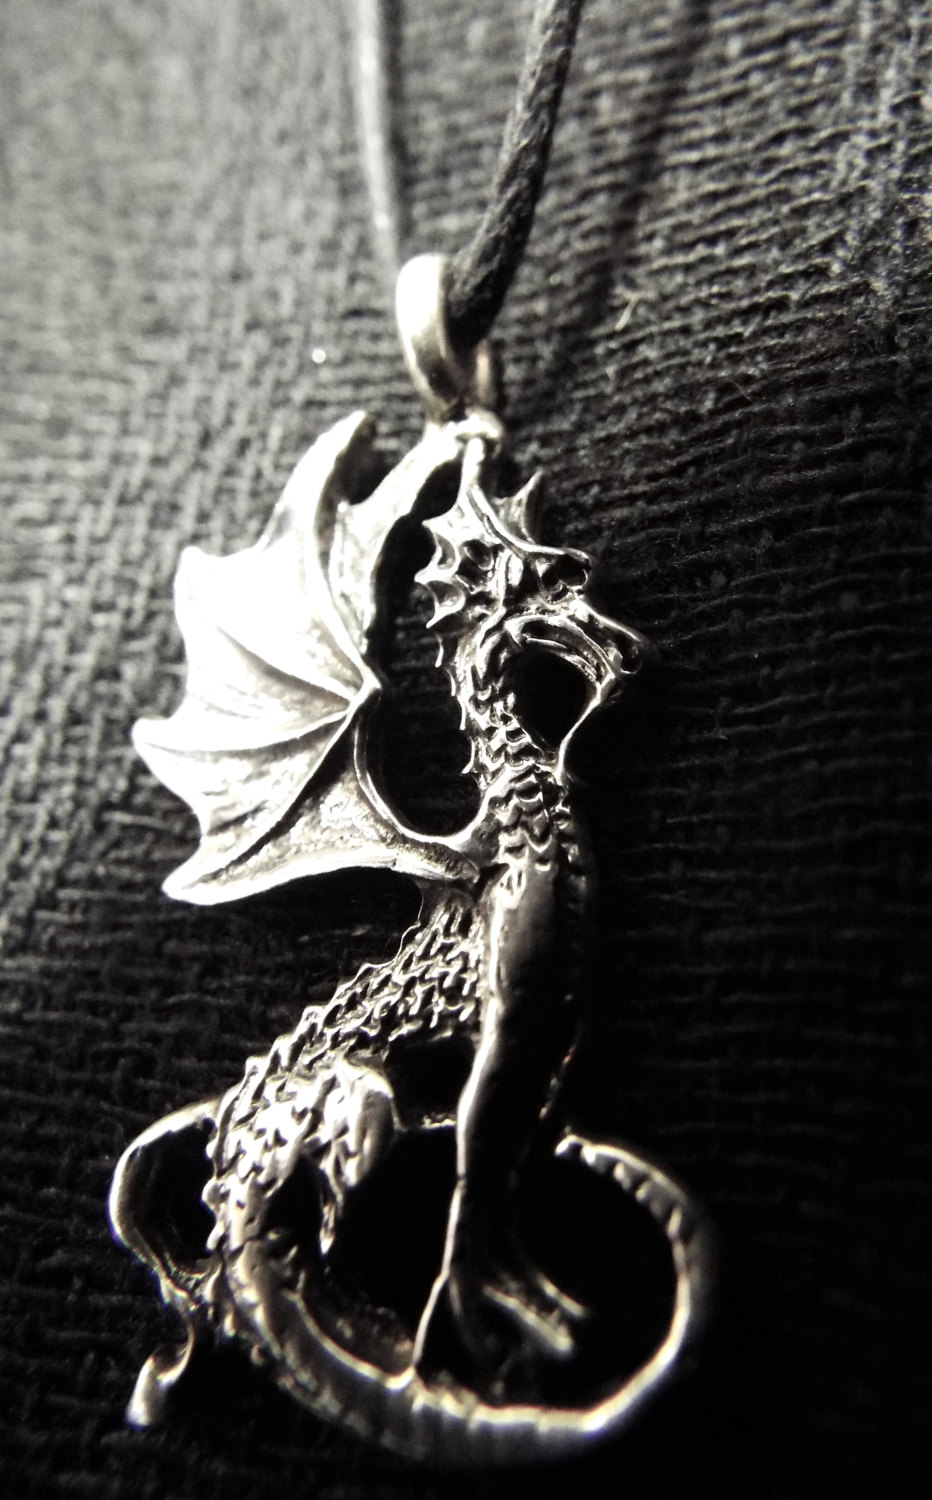 Pendant Dragon Silver Sterling 925 Handmade Gothic Dark Necklace Jewelry 1